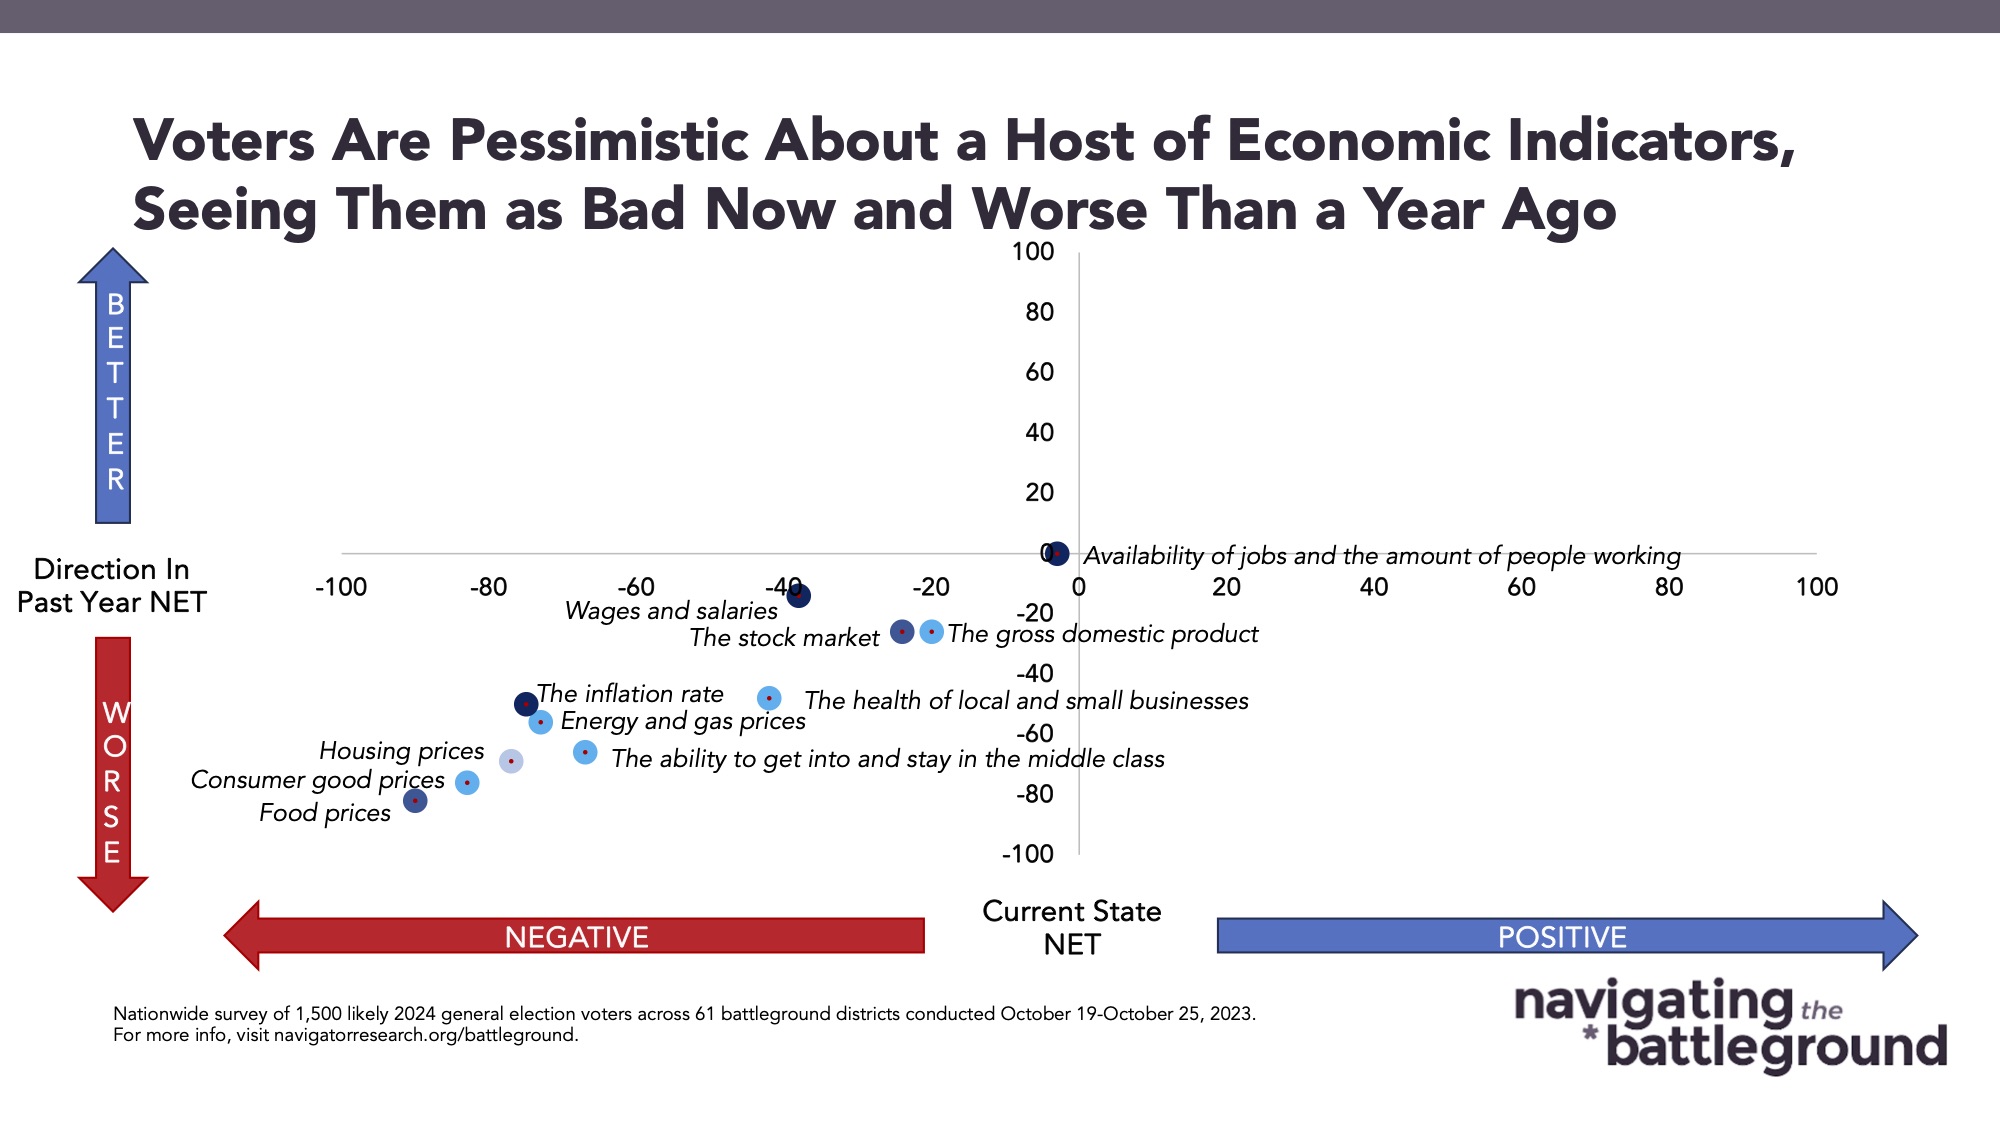 Bar graph of polling data from Navigating the Battleground. Title: Voters Are Pessimistic About a Host of Economic Indicators, Seeing Them as Bad Now and Worse Than a Year Ago